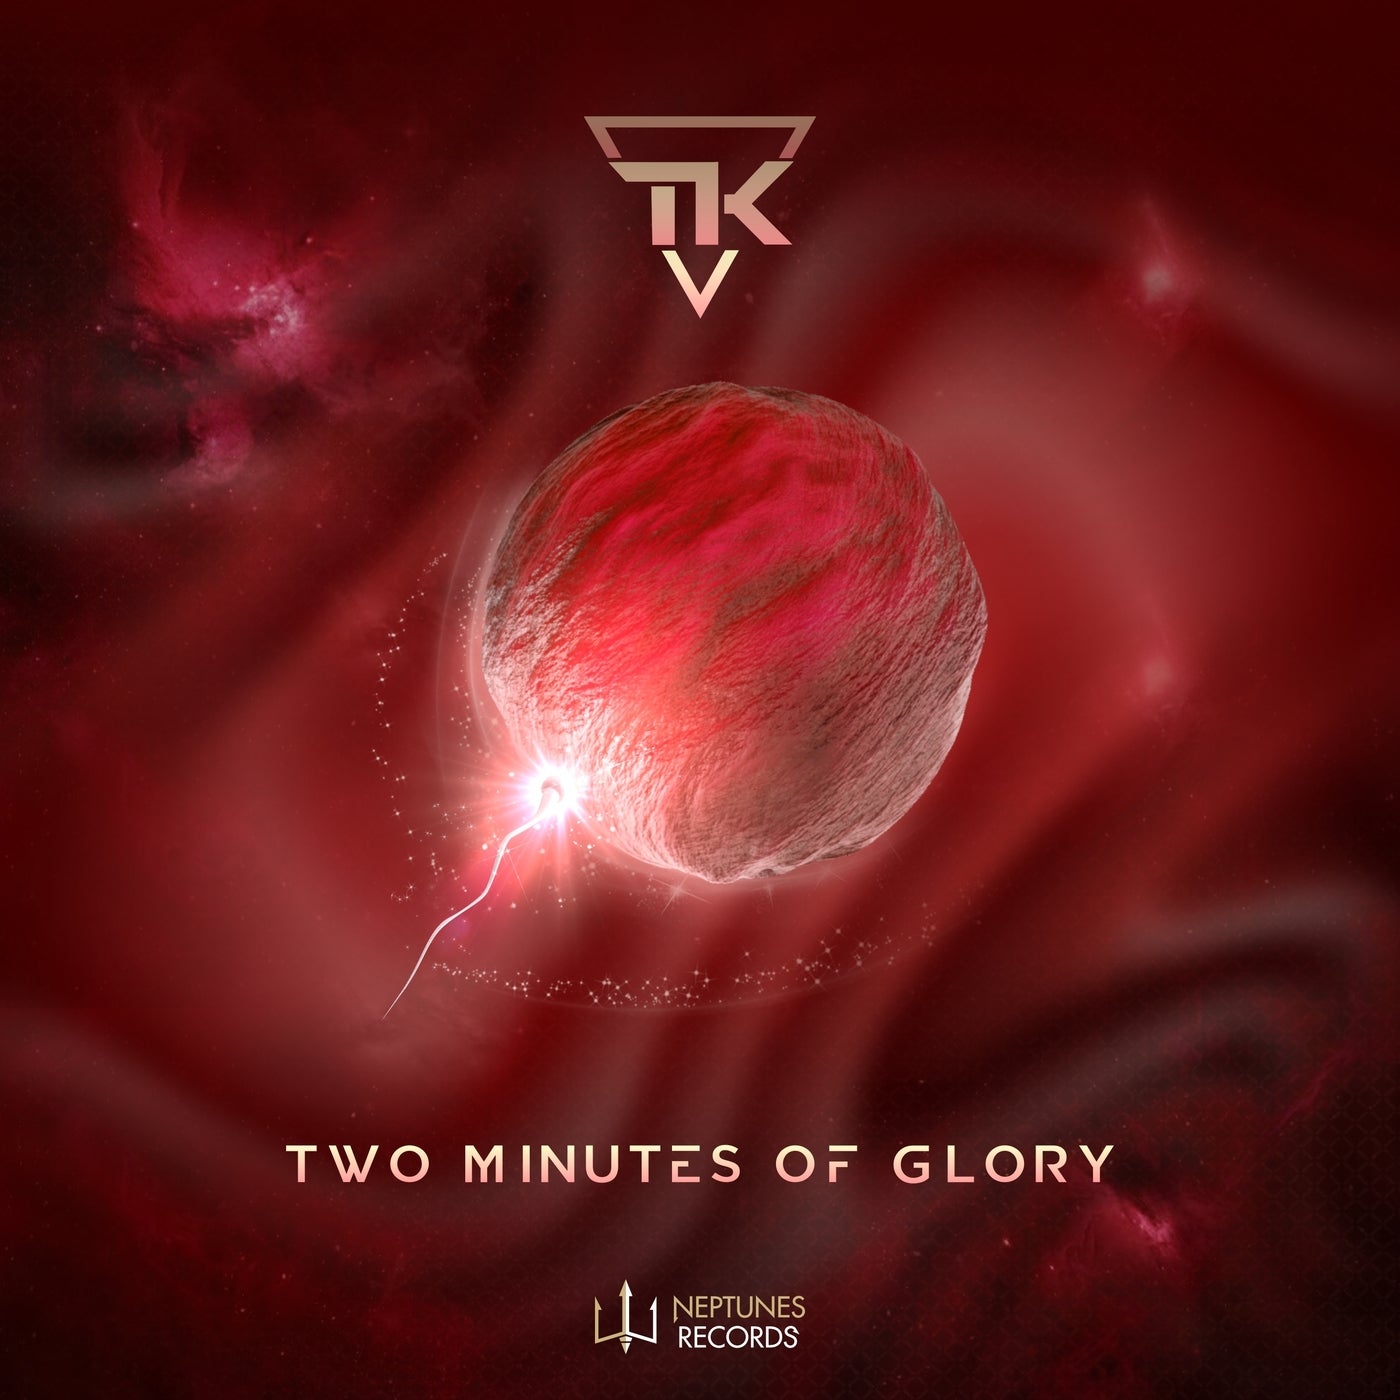 Two Minutes of Glory